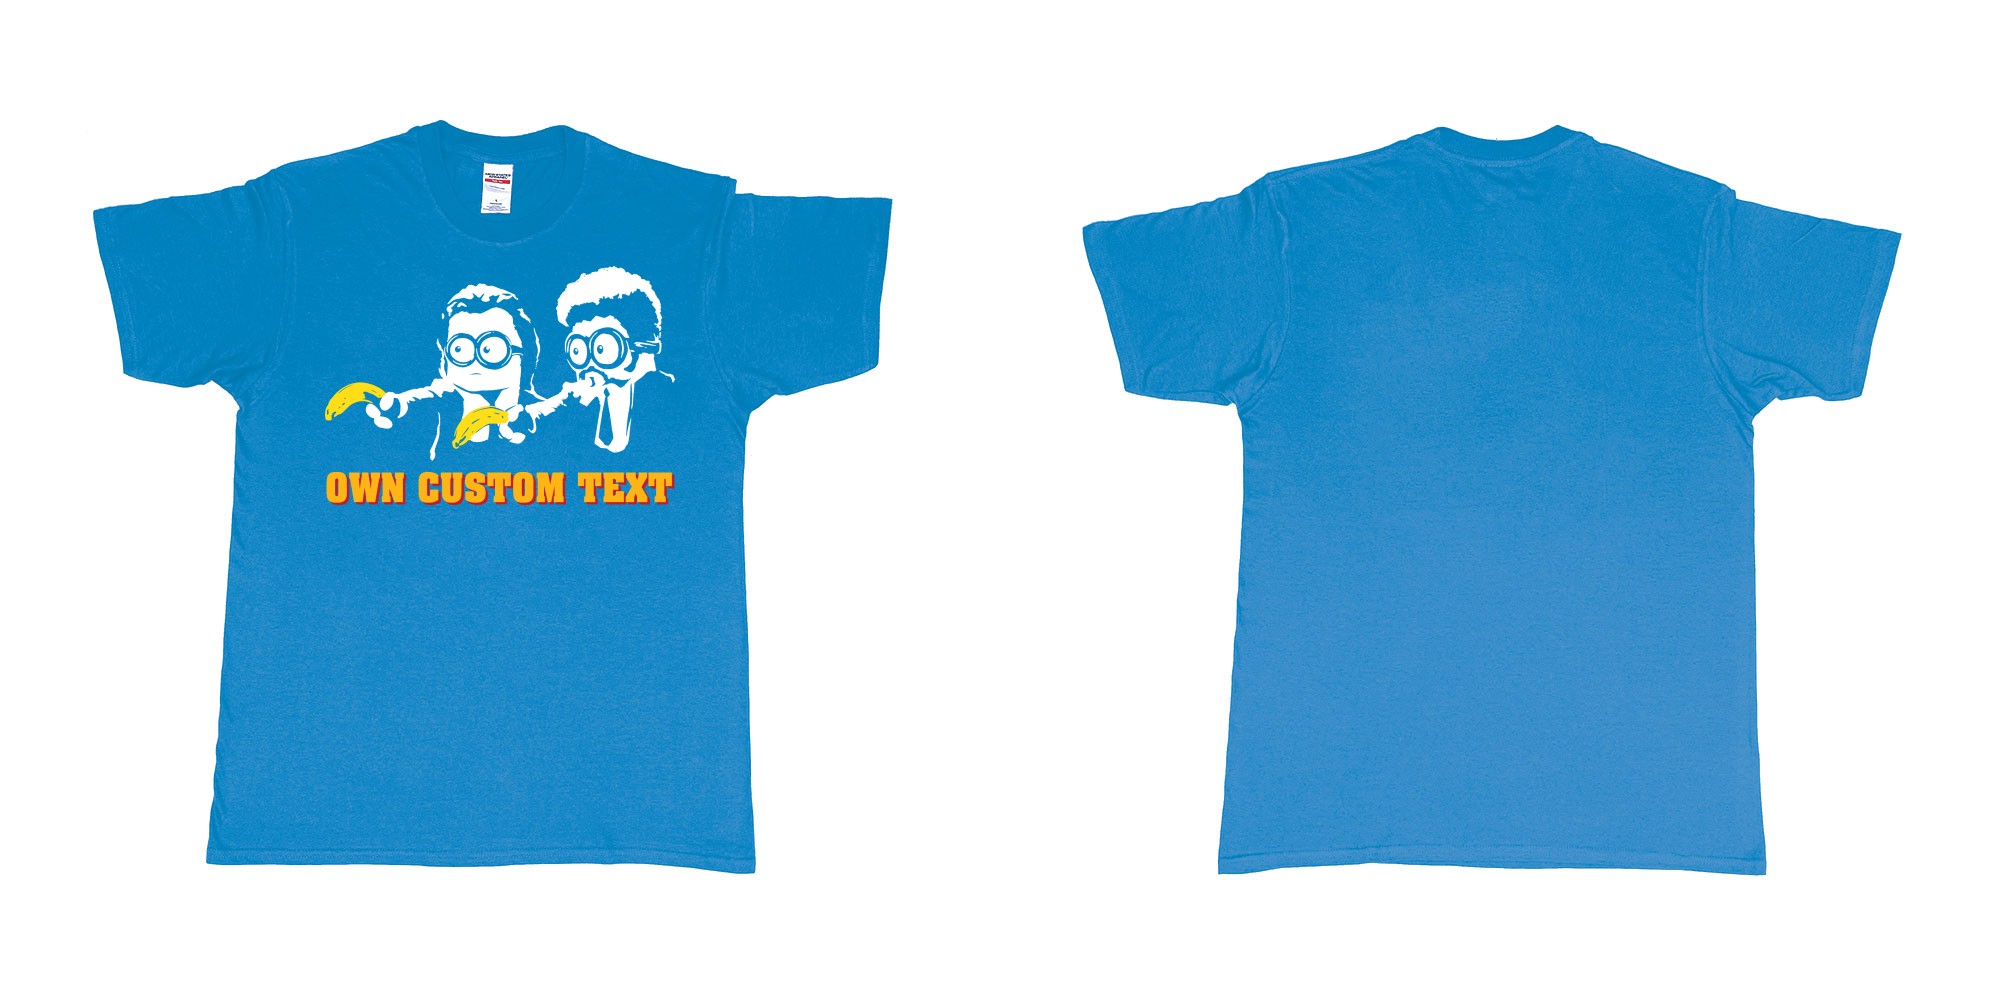 Custom tshirt design minions pulp fiction in fabric color sapphire choice your own text made in Bali by The Pirate Way